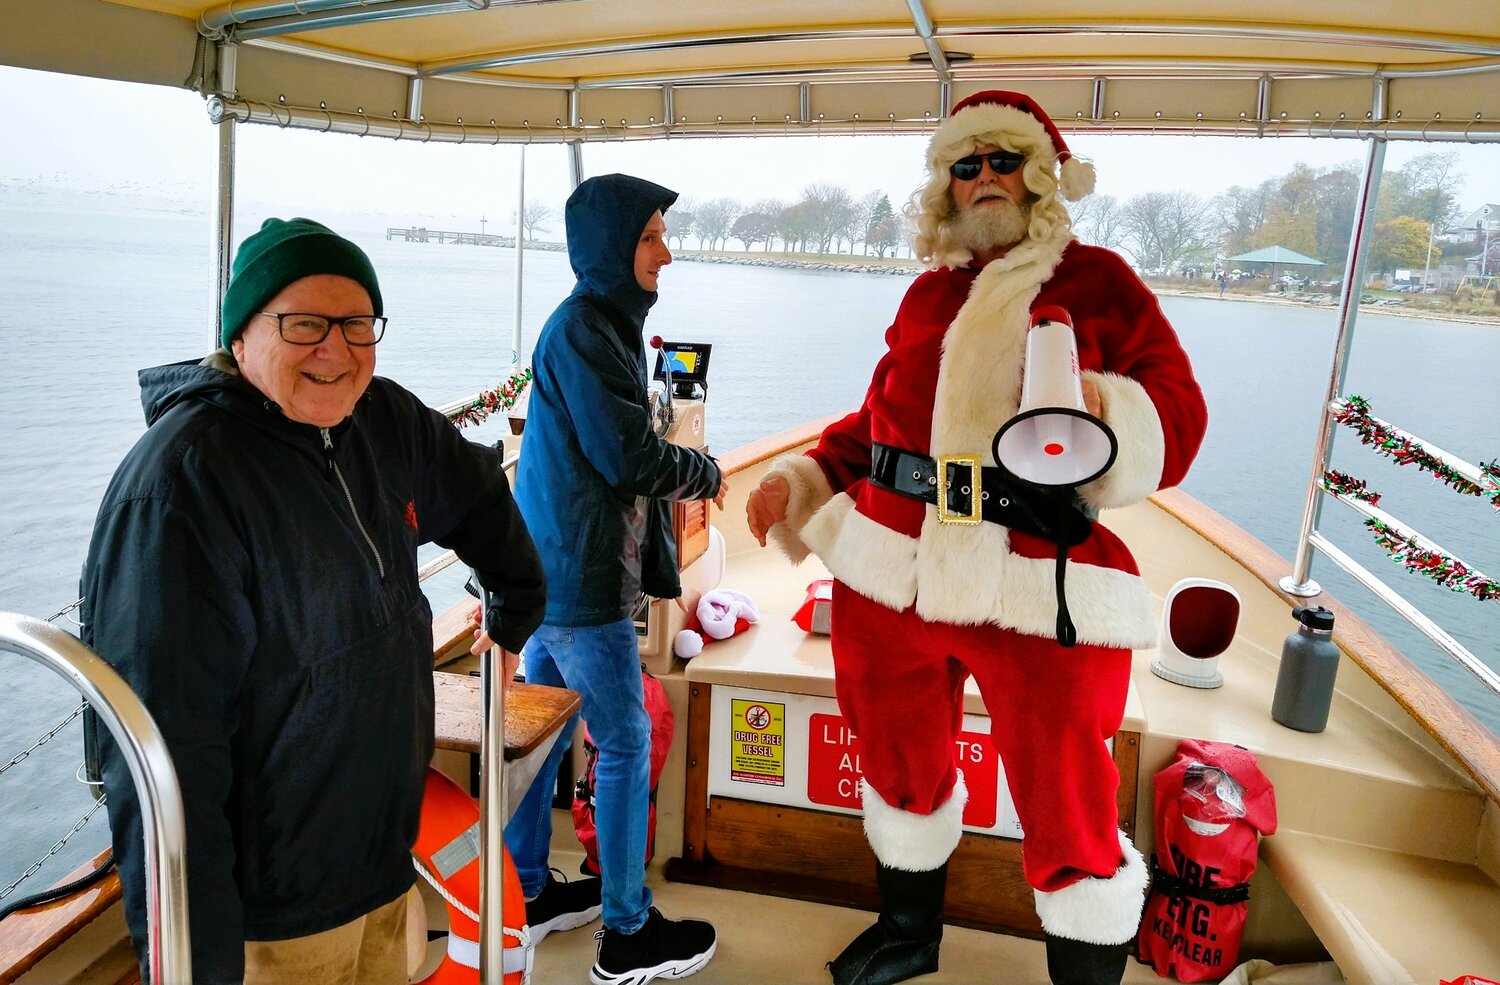 On the Lady Pomham II are, left to right, Dave Kelleher, one of the founders of Friends of Pomham Rocks Lighthouse, Alex Dias, Boat Captain and Vice Chair of the group, and Santa, member Andy Leddy.